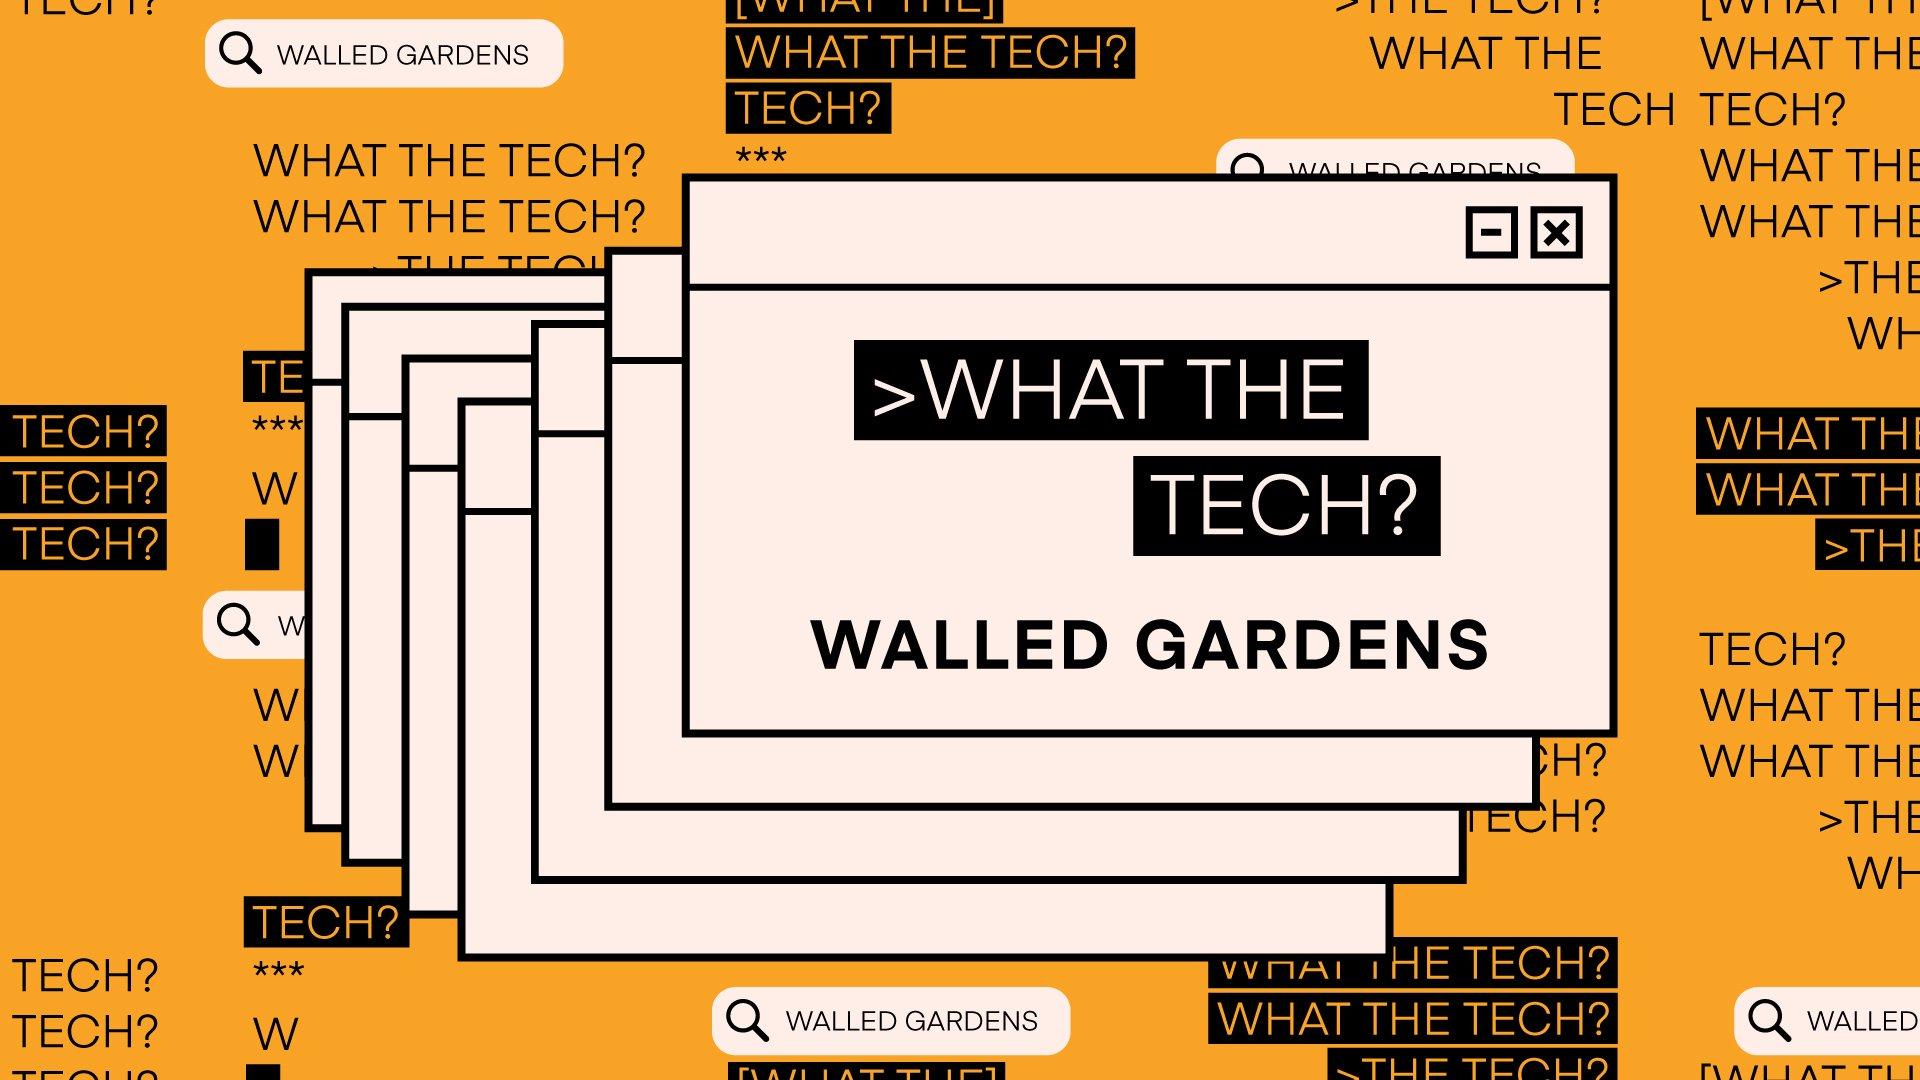 What the Tech are walled gardens?